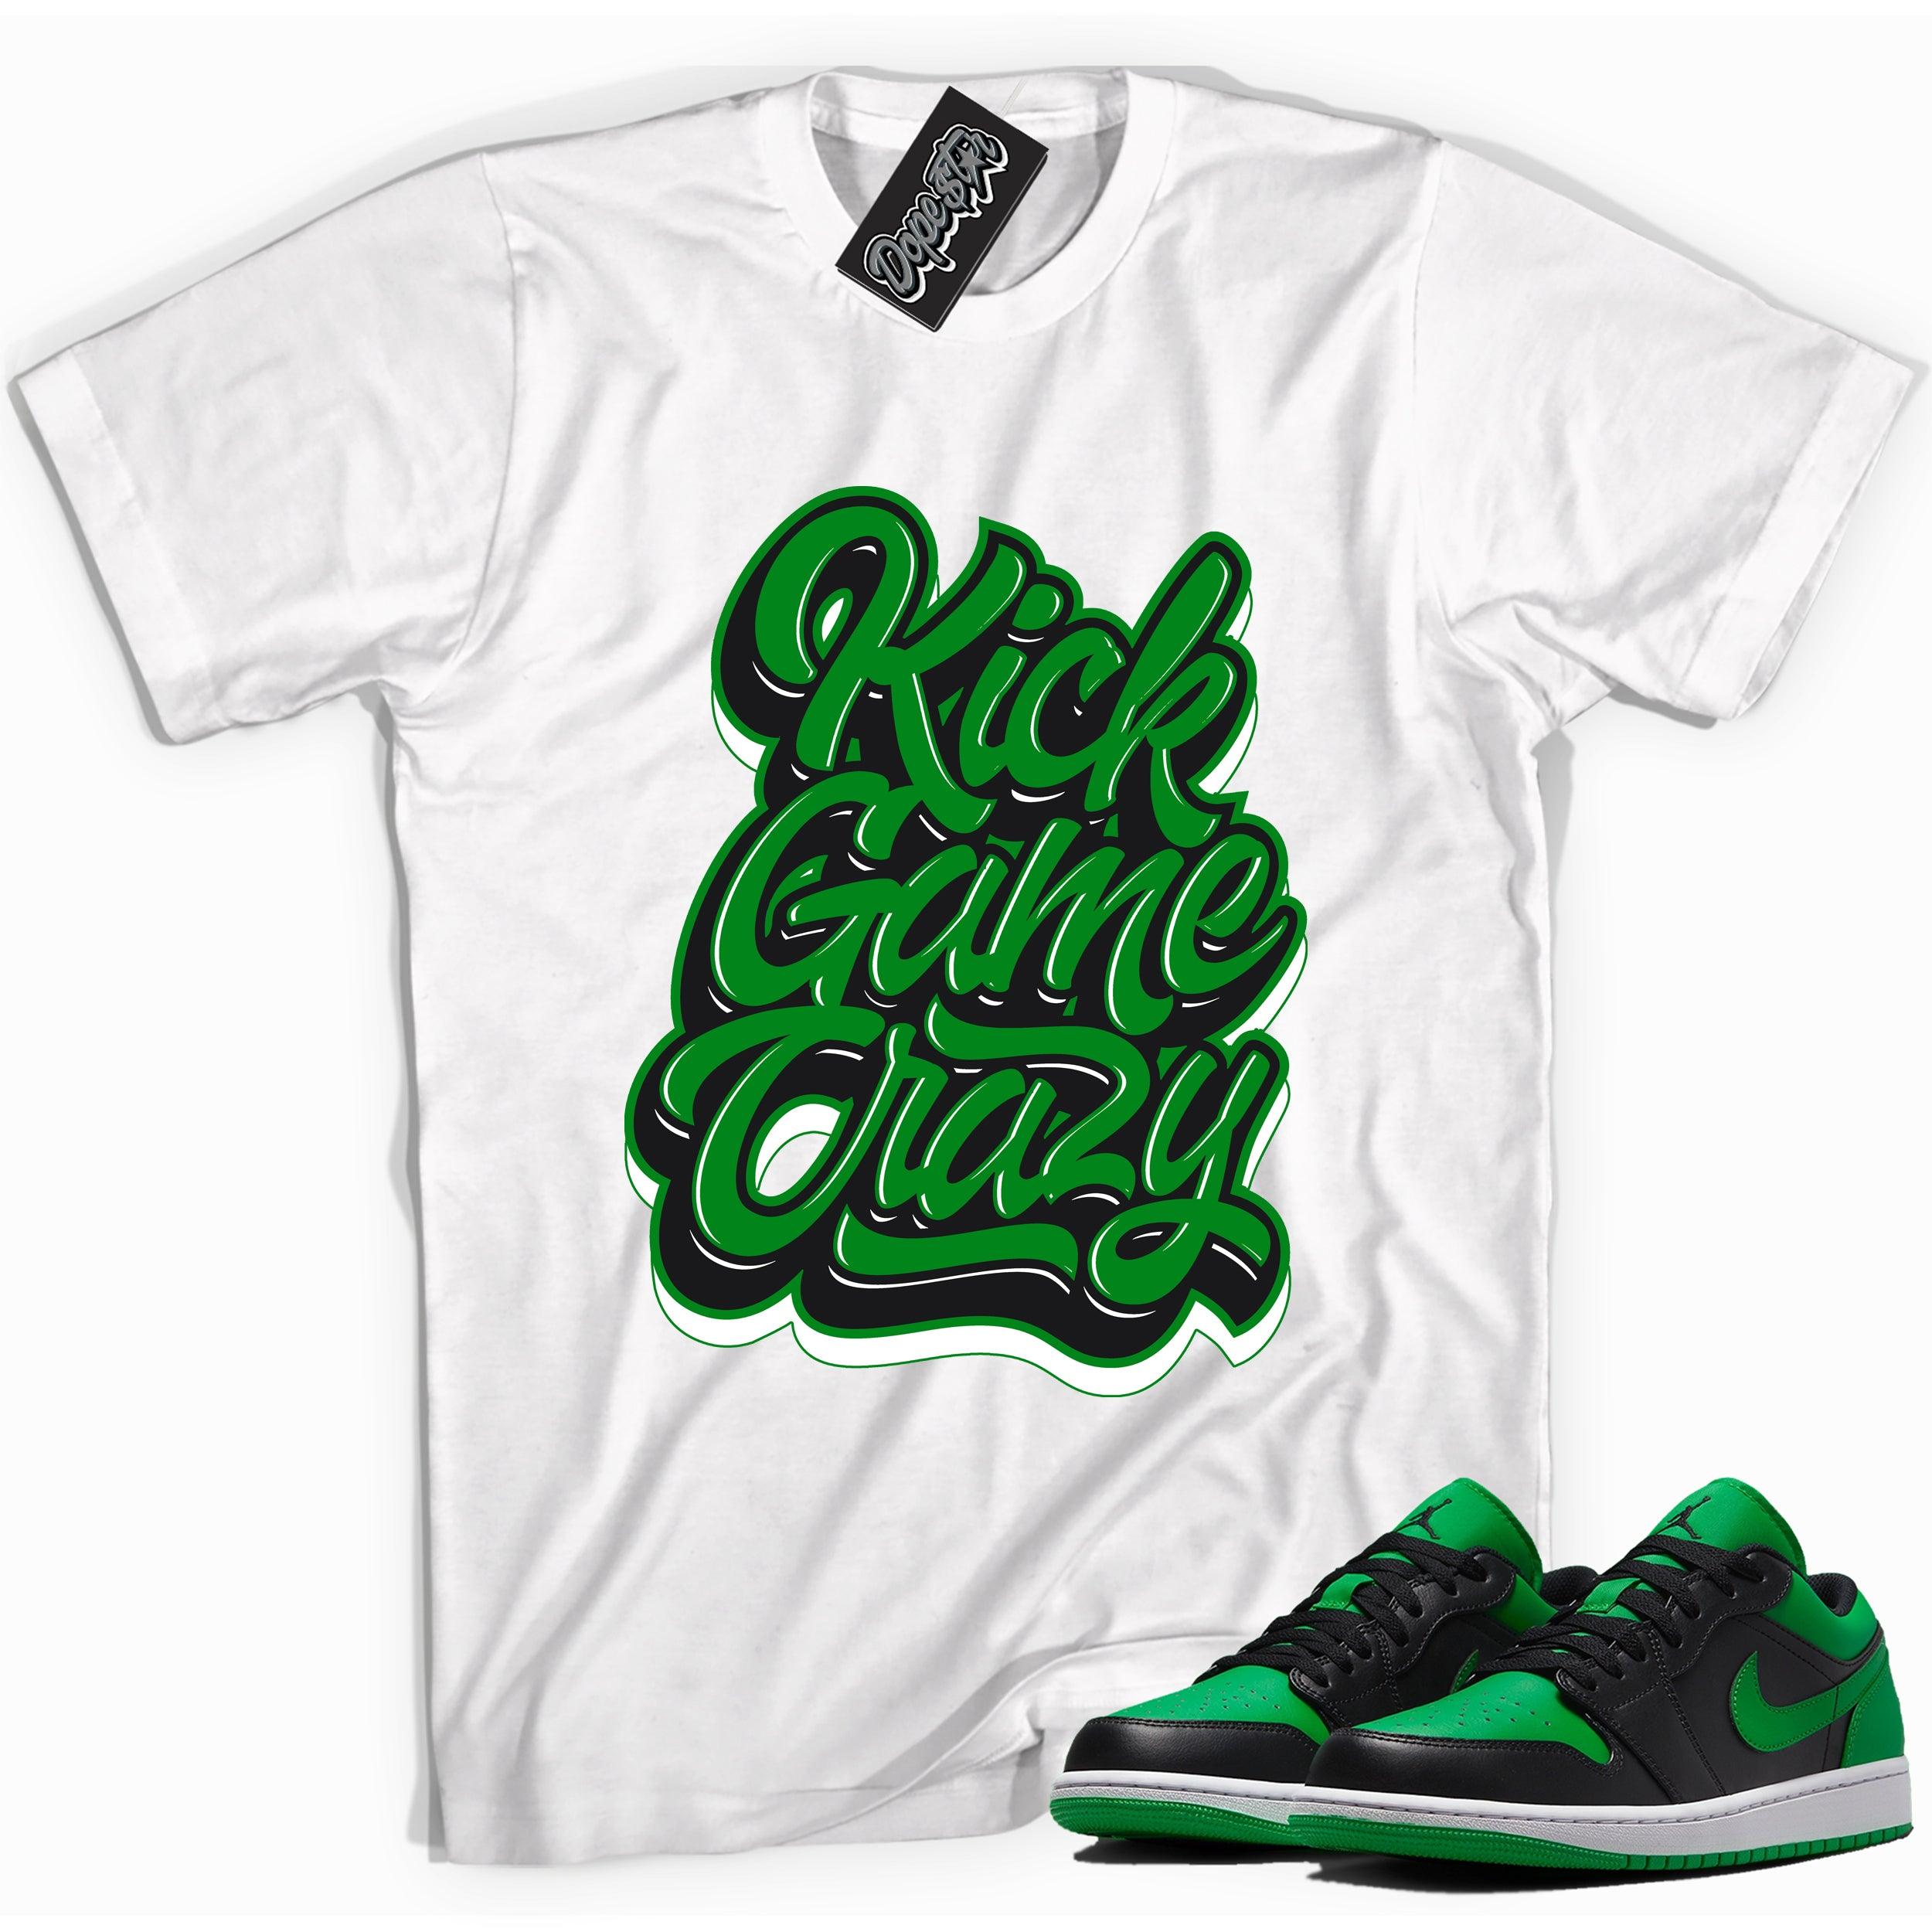 Cool white graphic tee with 'Kick Game Crazy' print, that perfectly matches Air Jordan 1 Low Lucky Green sneakers